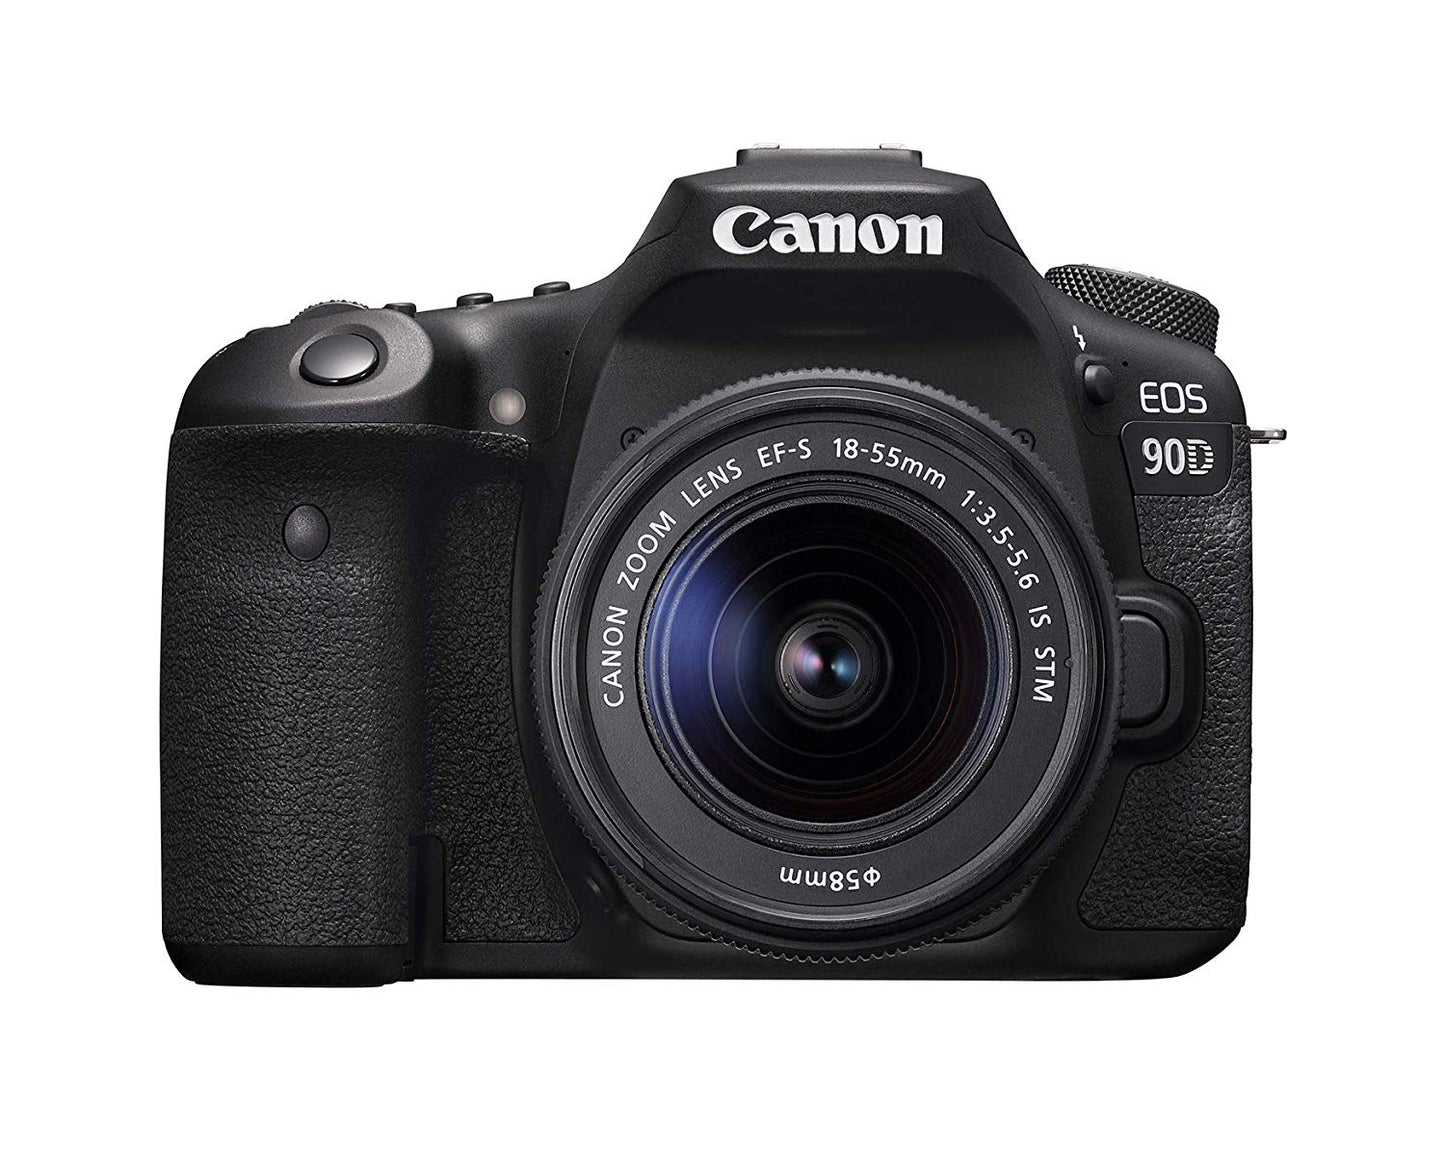 Canon 90D Digital SLR Camera with 18-55 IS STM Lens